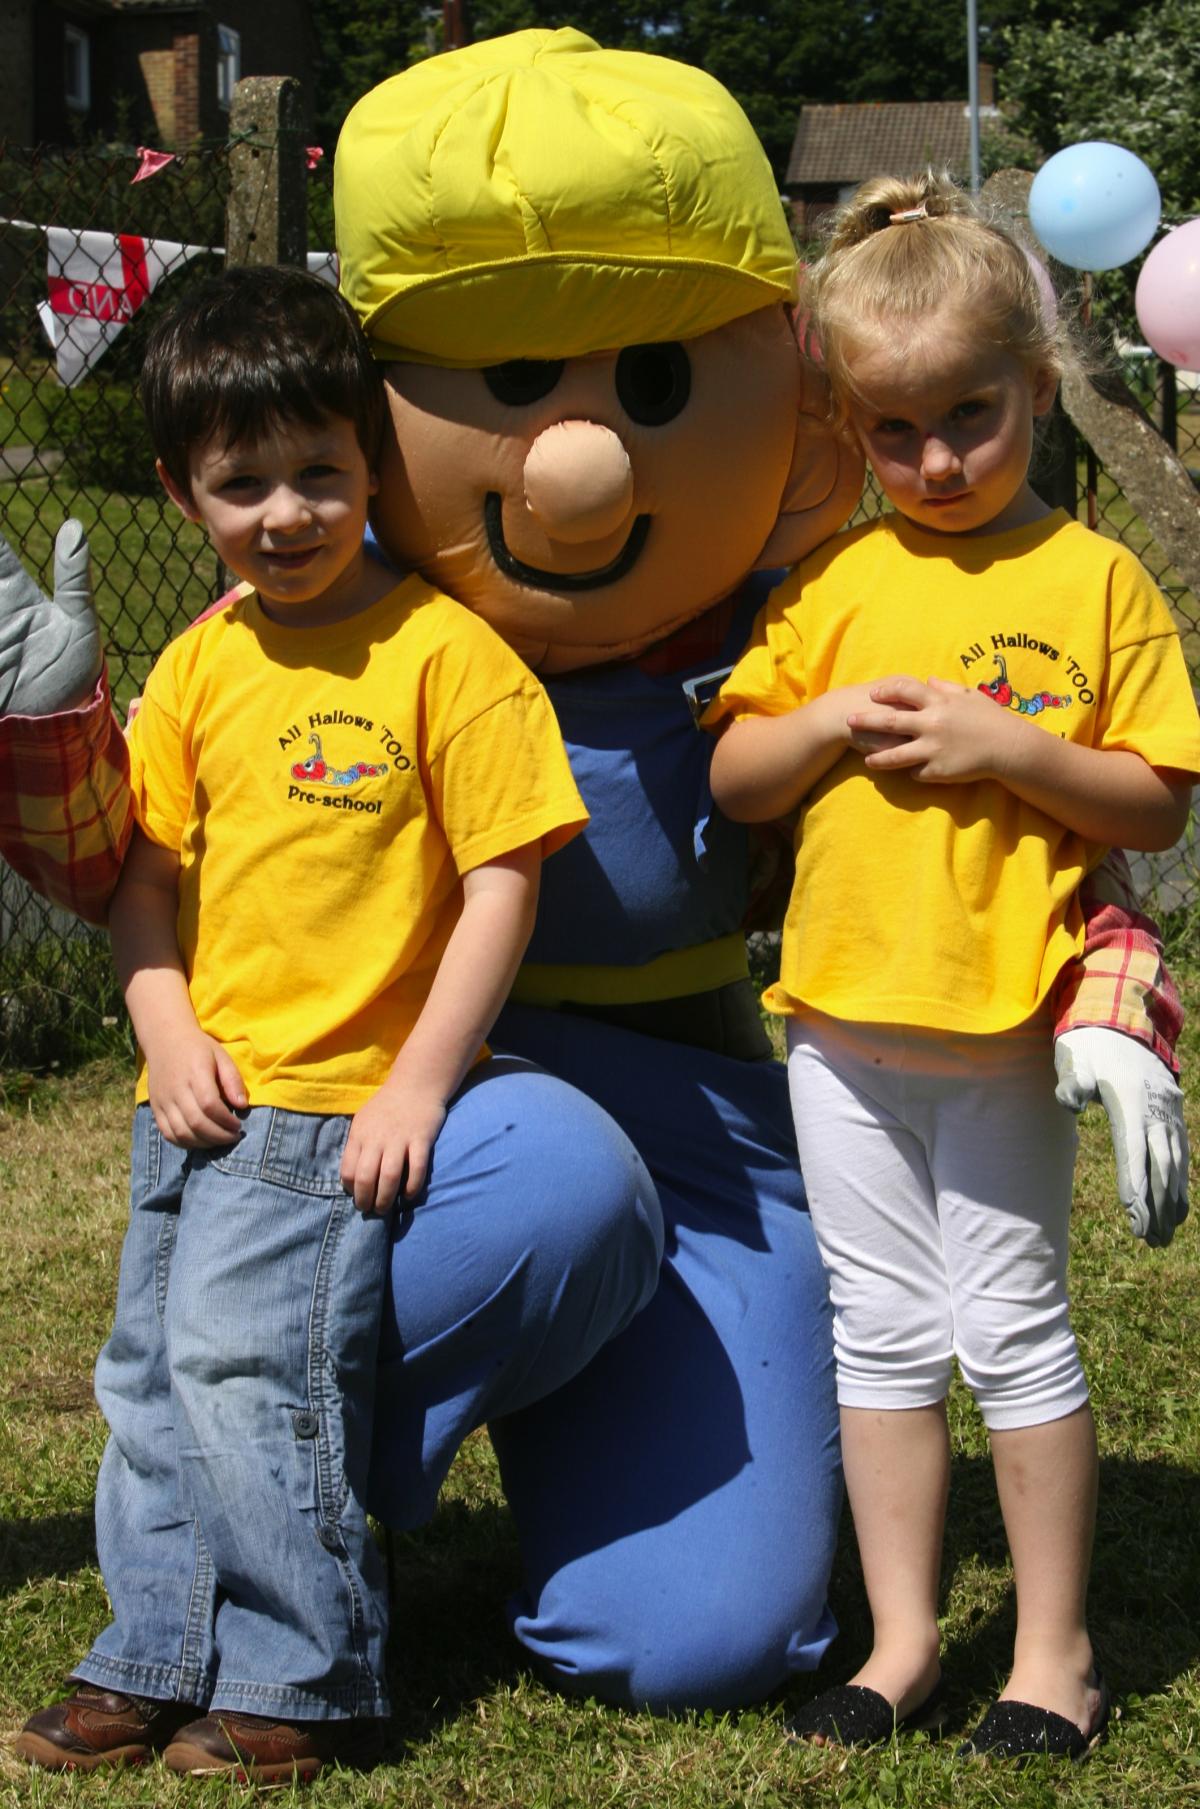 An event in 2008 to mark the 40th anniversary of All Hallows Pre-School